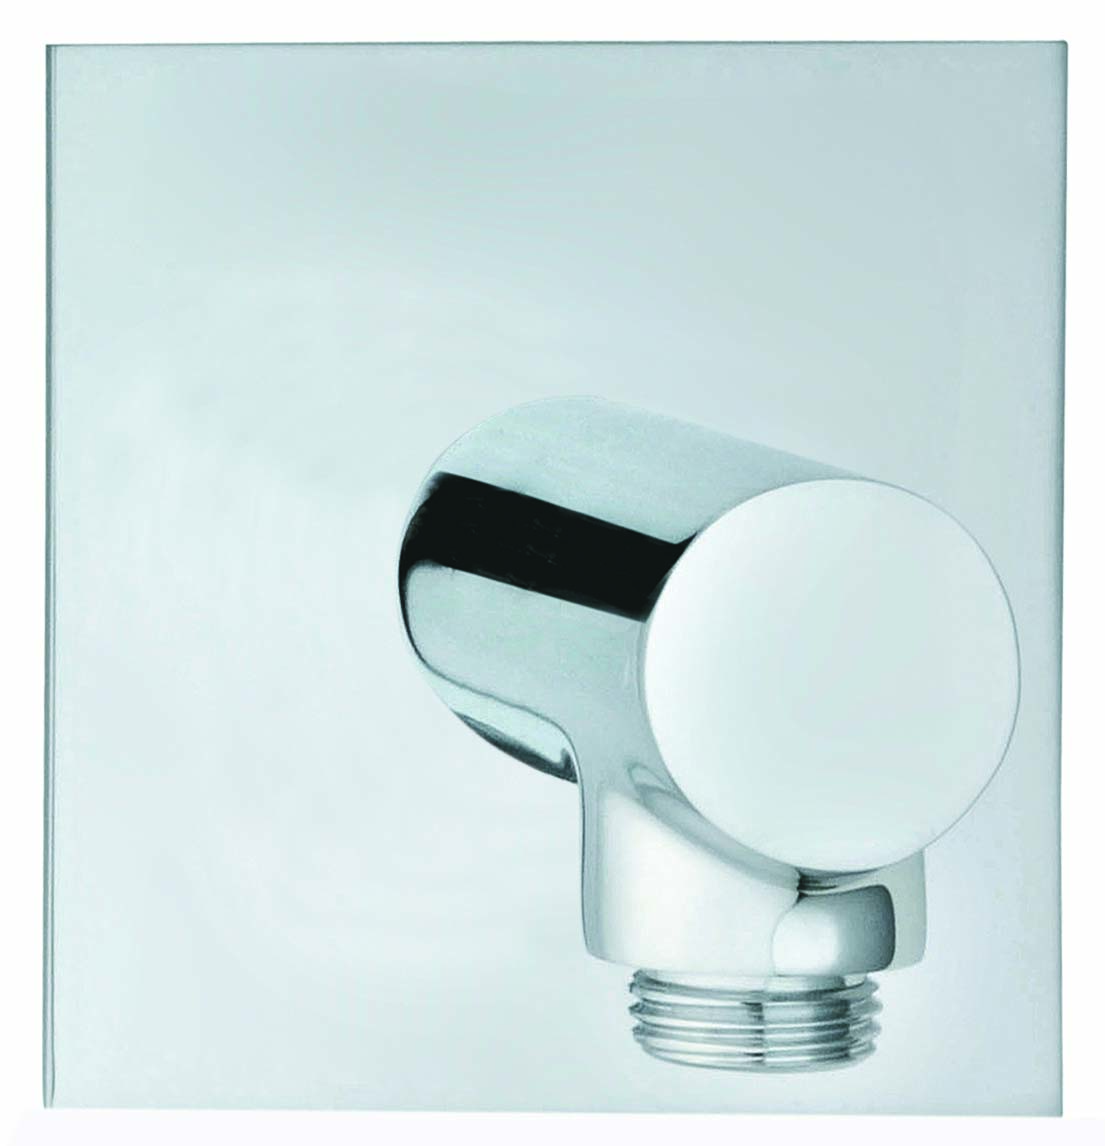 Istanbul Buit In Handshower Outlet